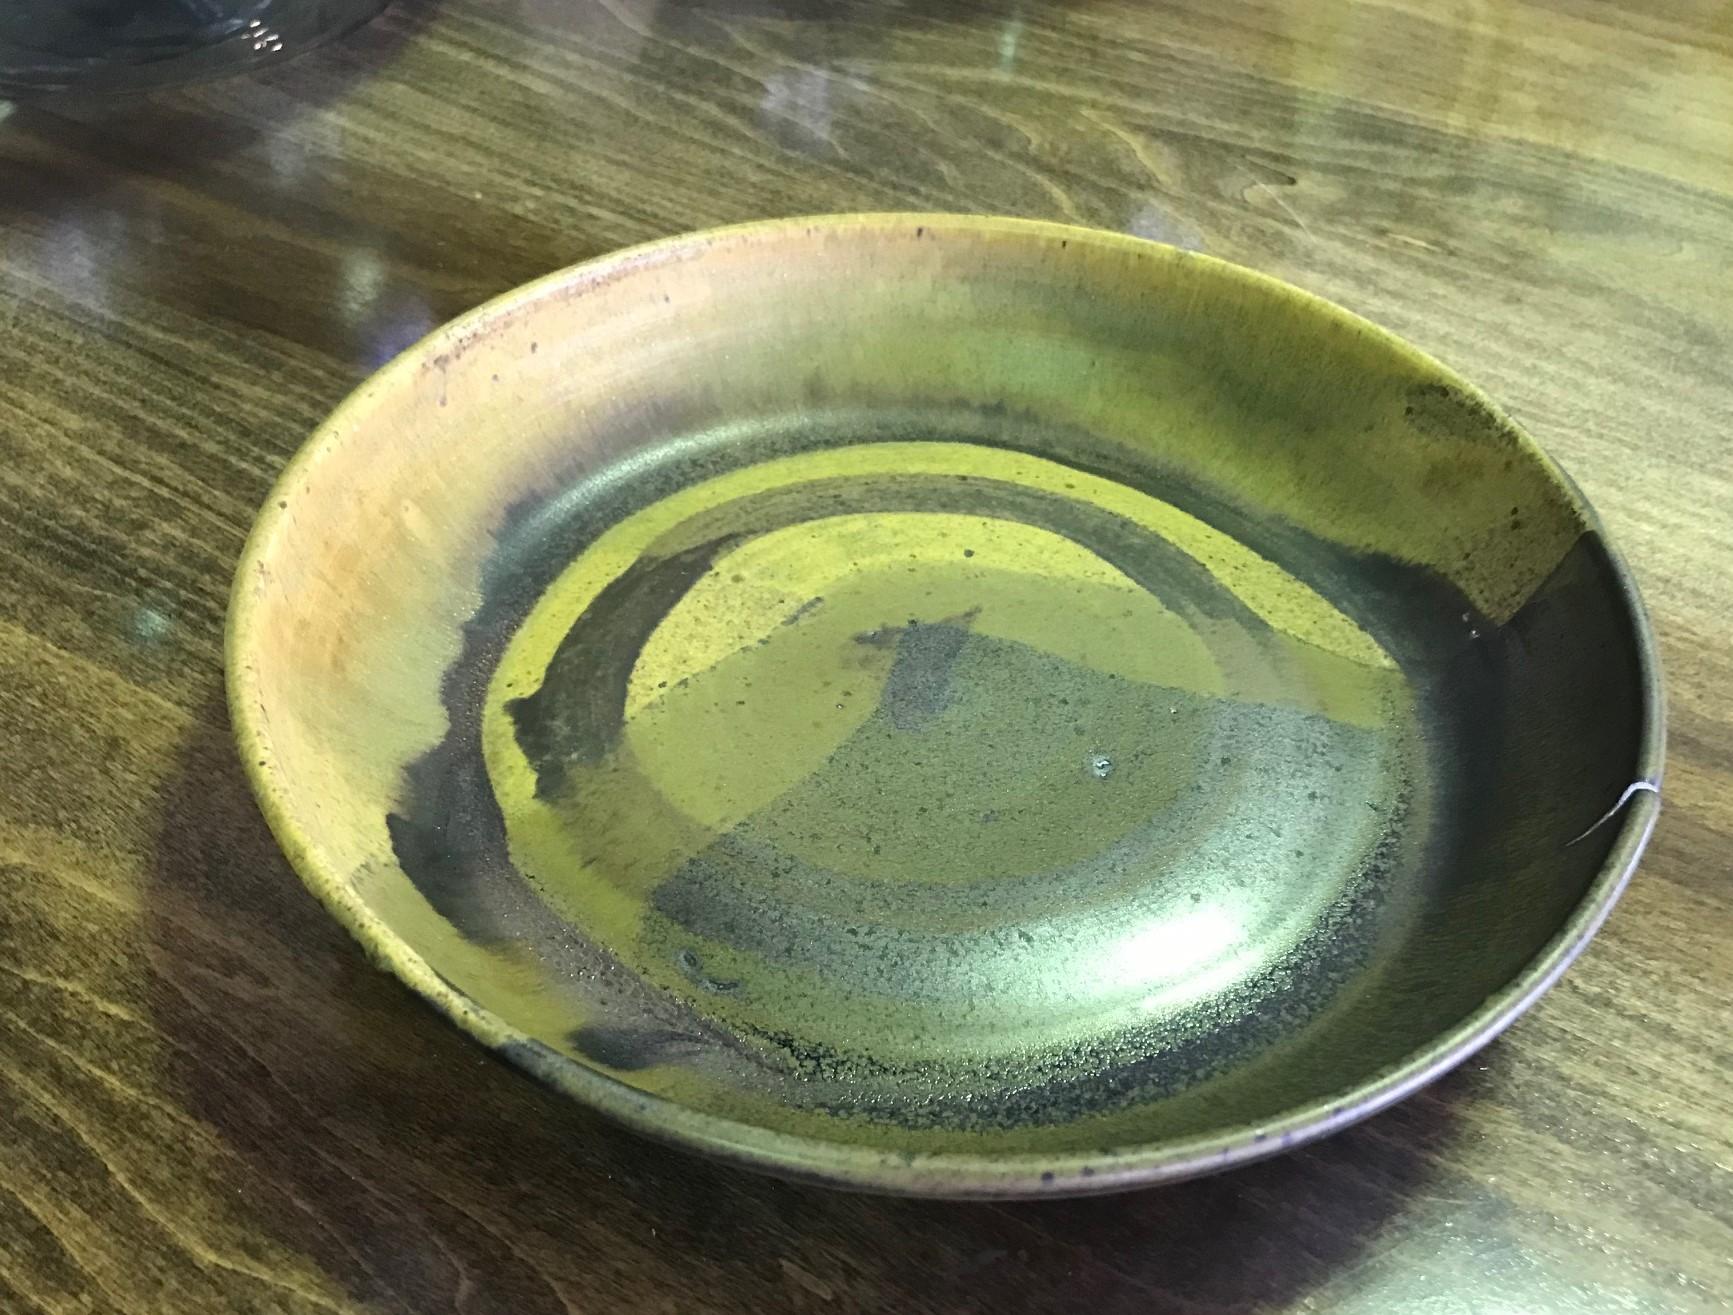 A wonderful work by famed Japanese-American ceramic master Toshiko Takaezu. This piece came from an estate of a retired professor who was a lifelong friend of Toshiko. Many of the other Takaezu pieces from her collection were donated to the Harn